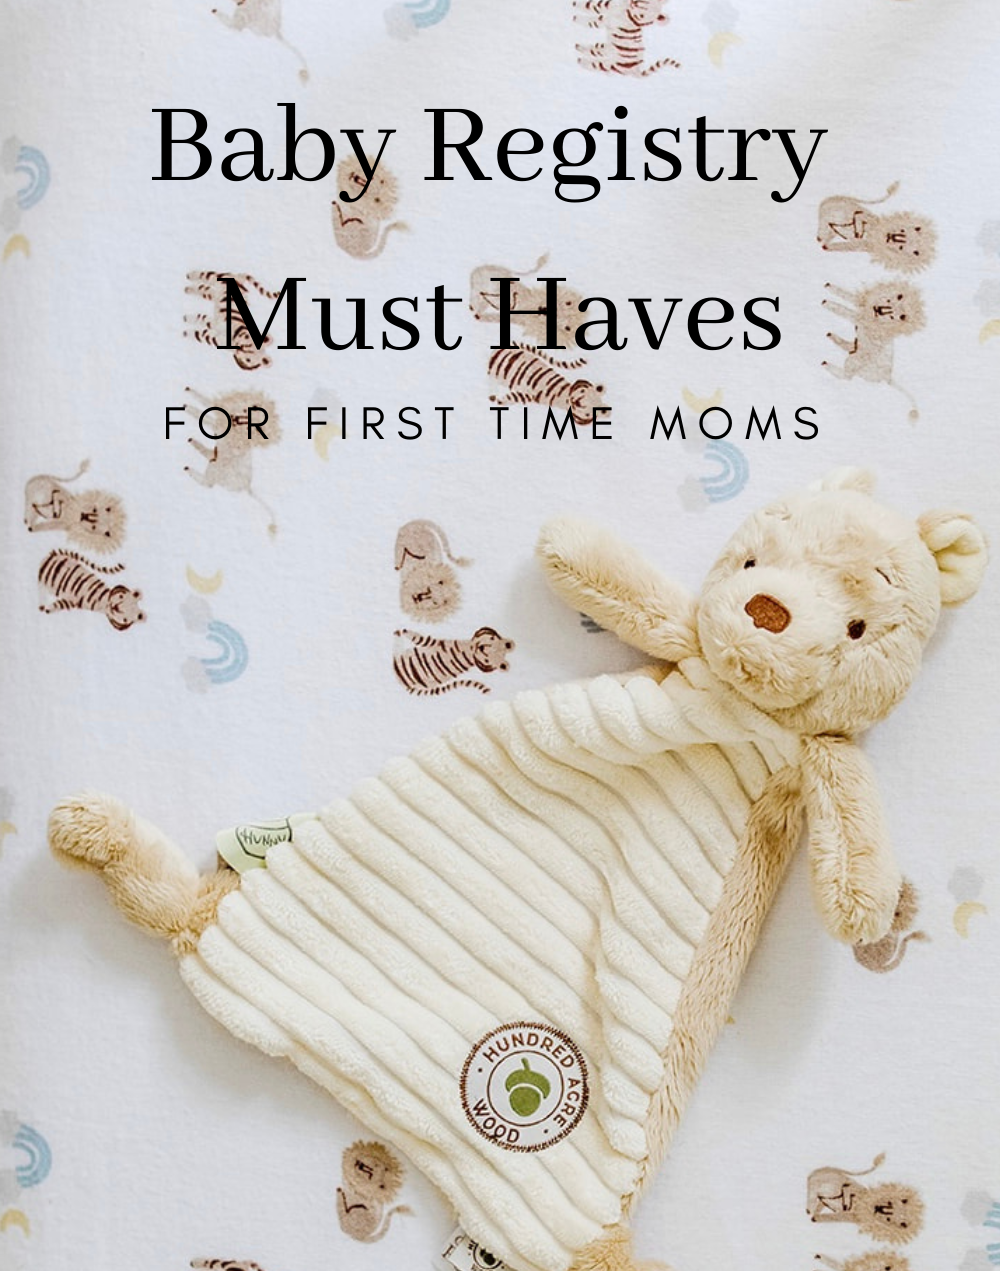 Baby registry must haves for first time moms